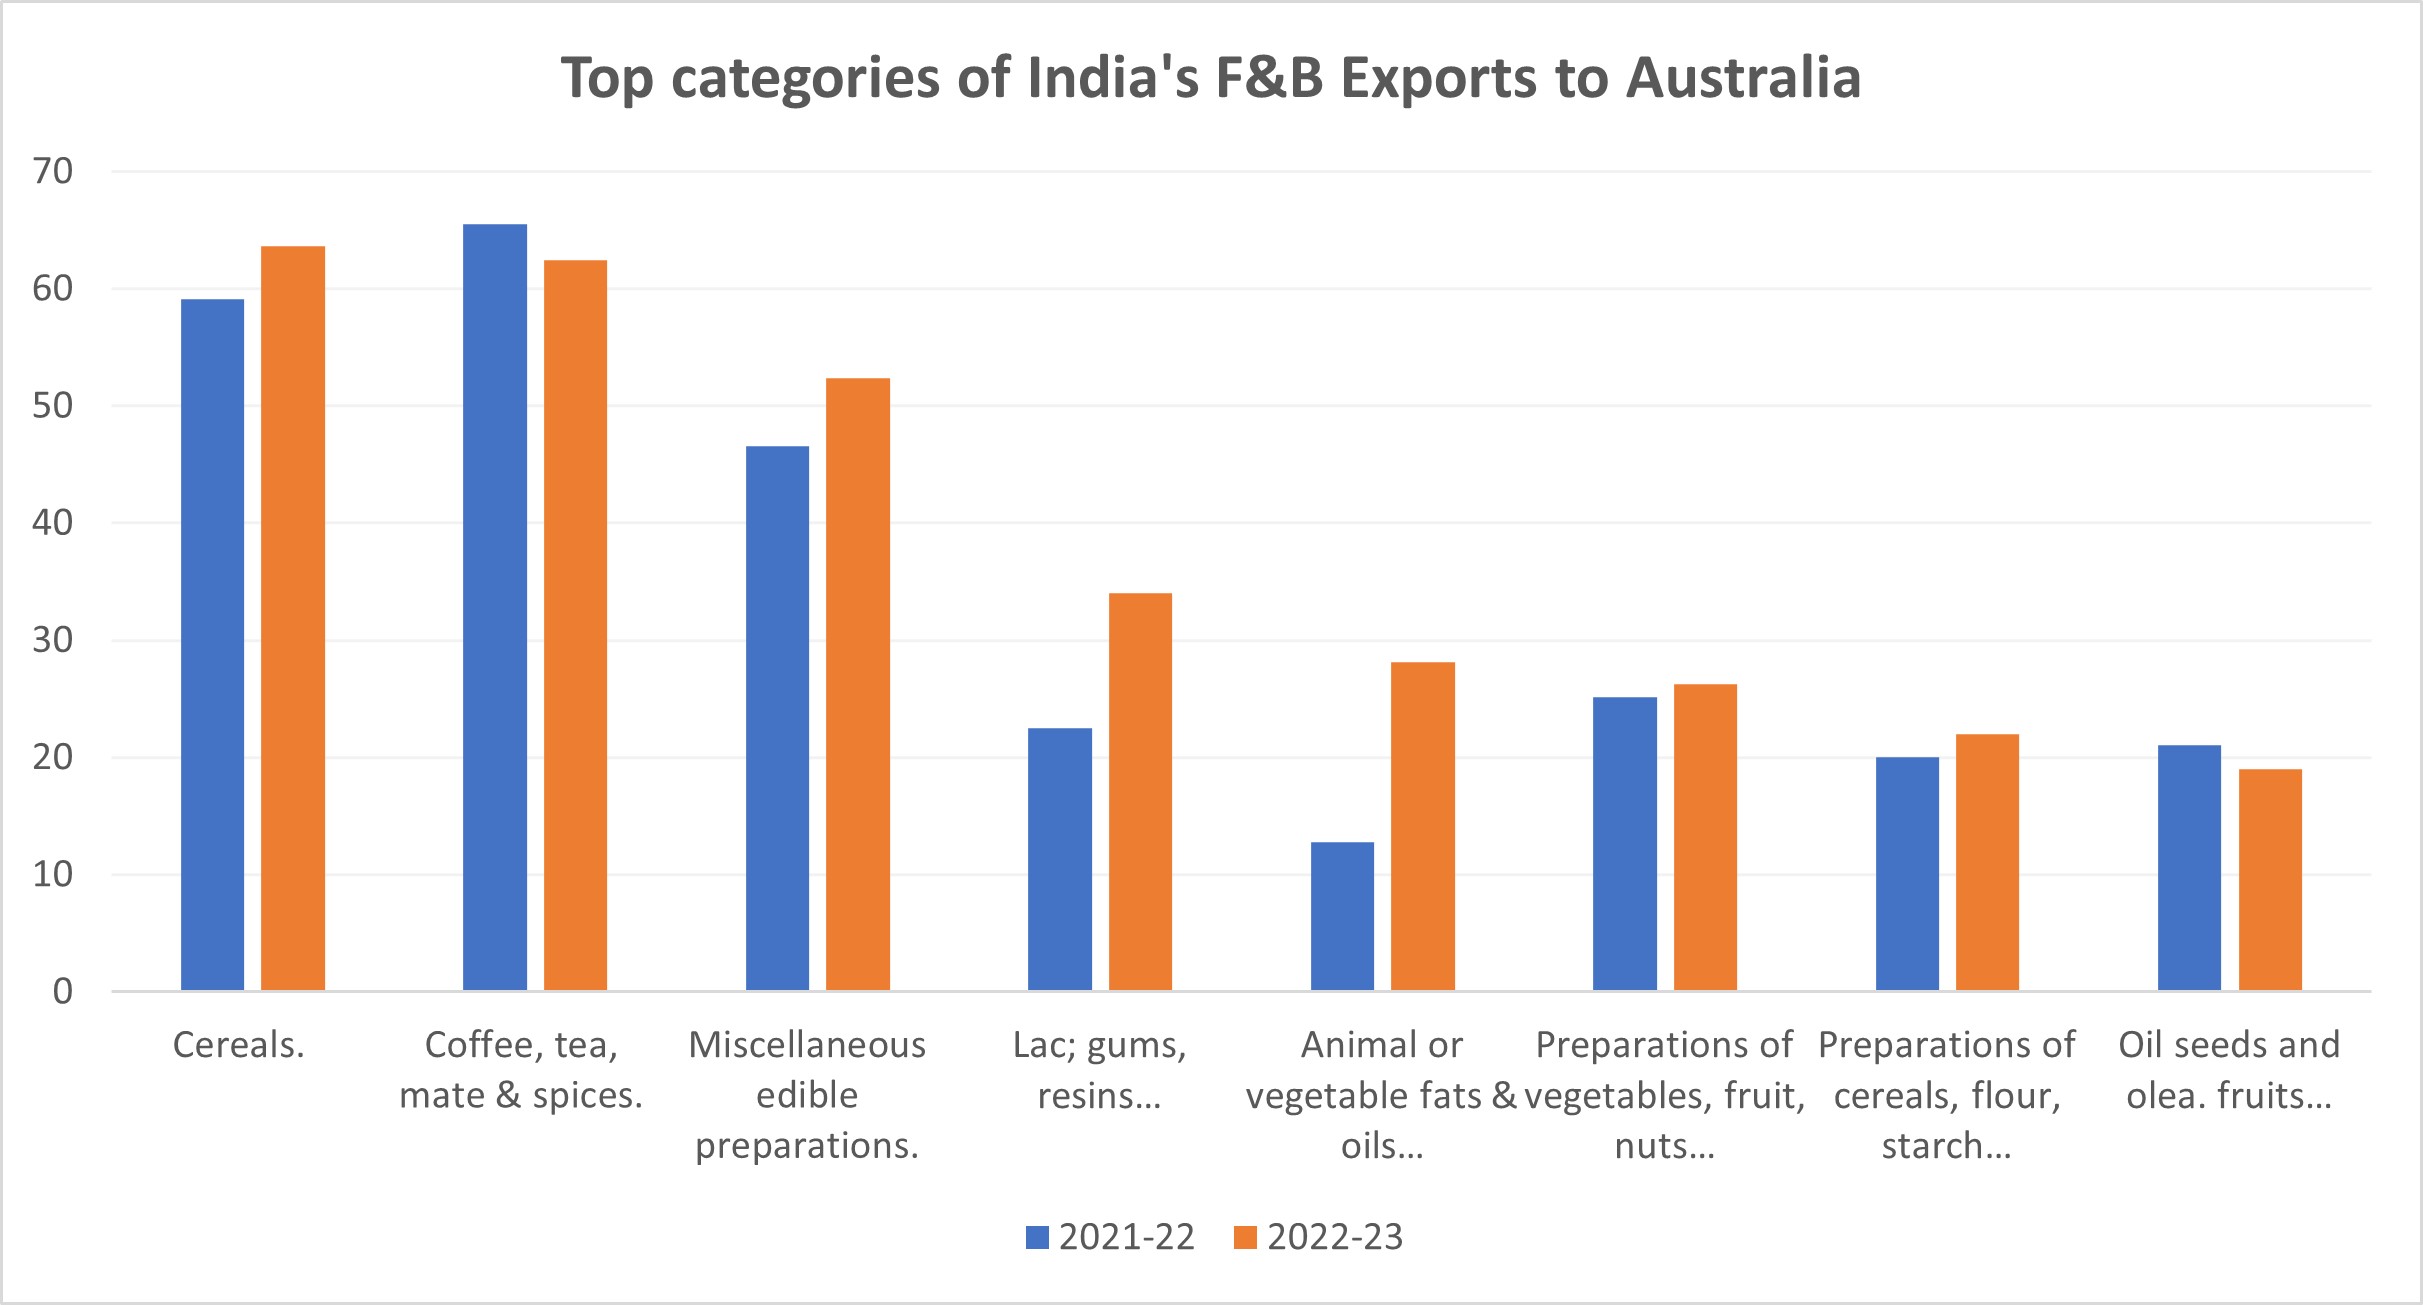 Top categories of F&B Exports to Australia